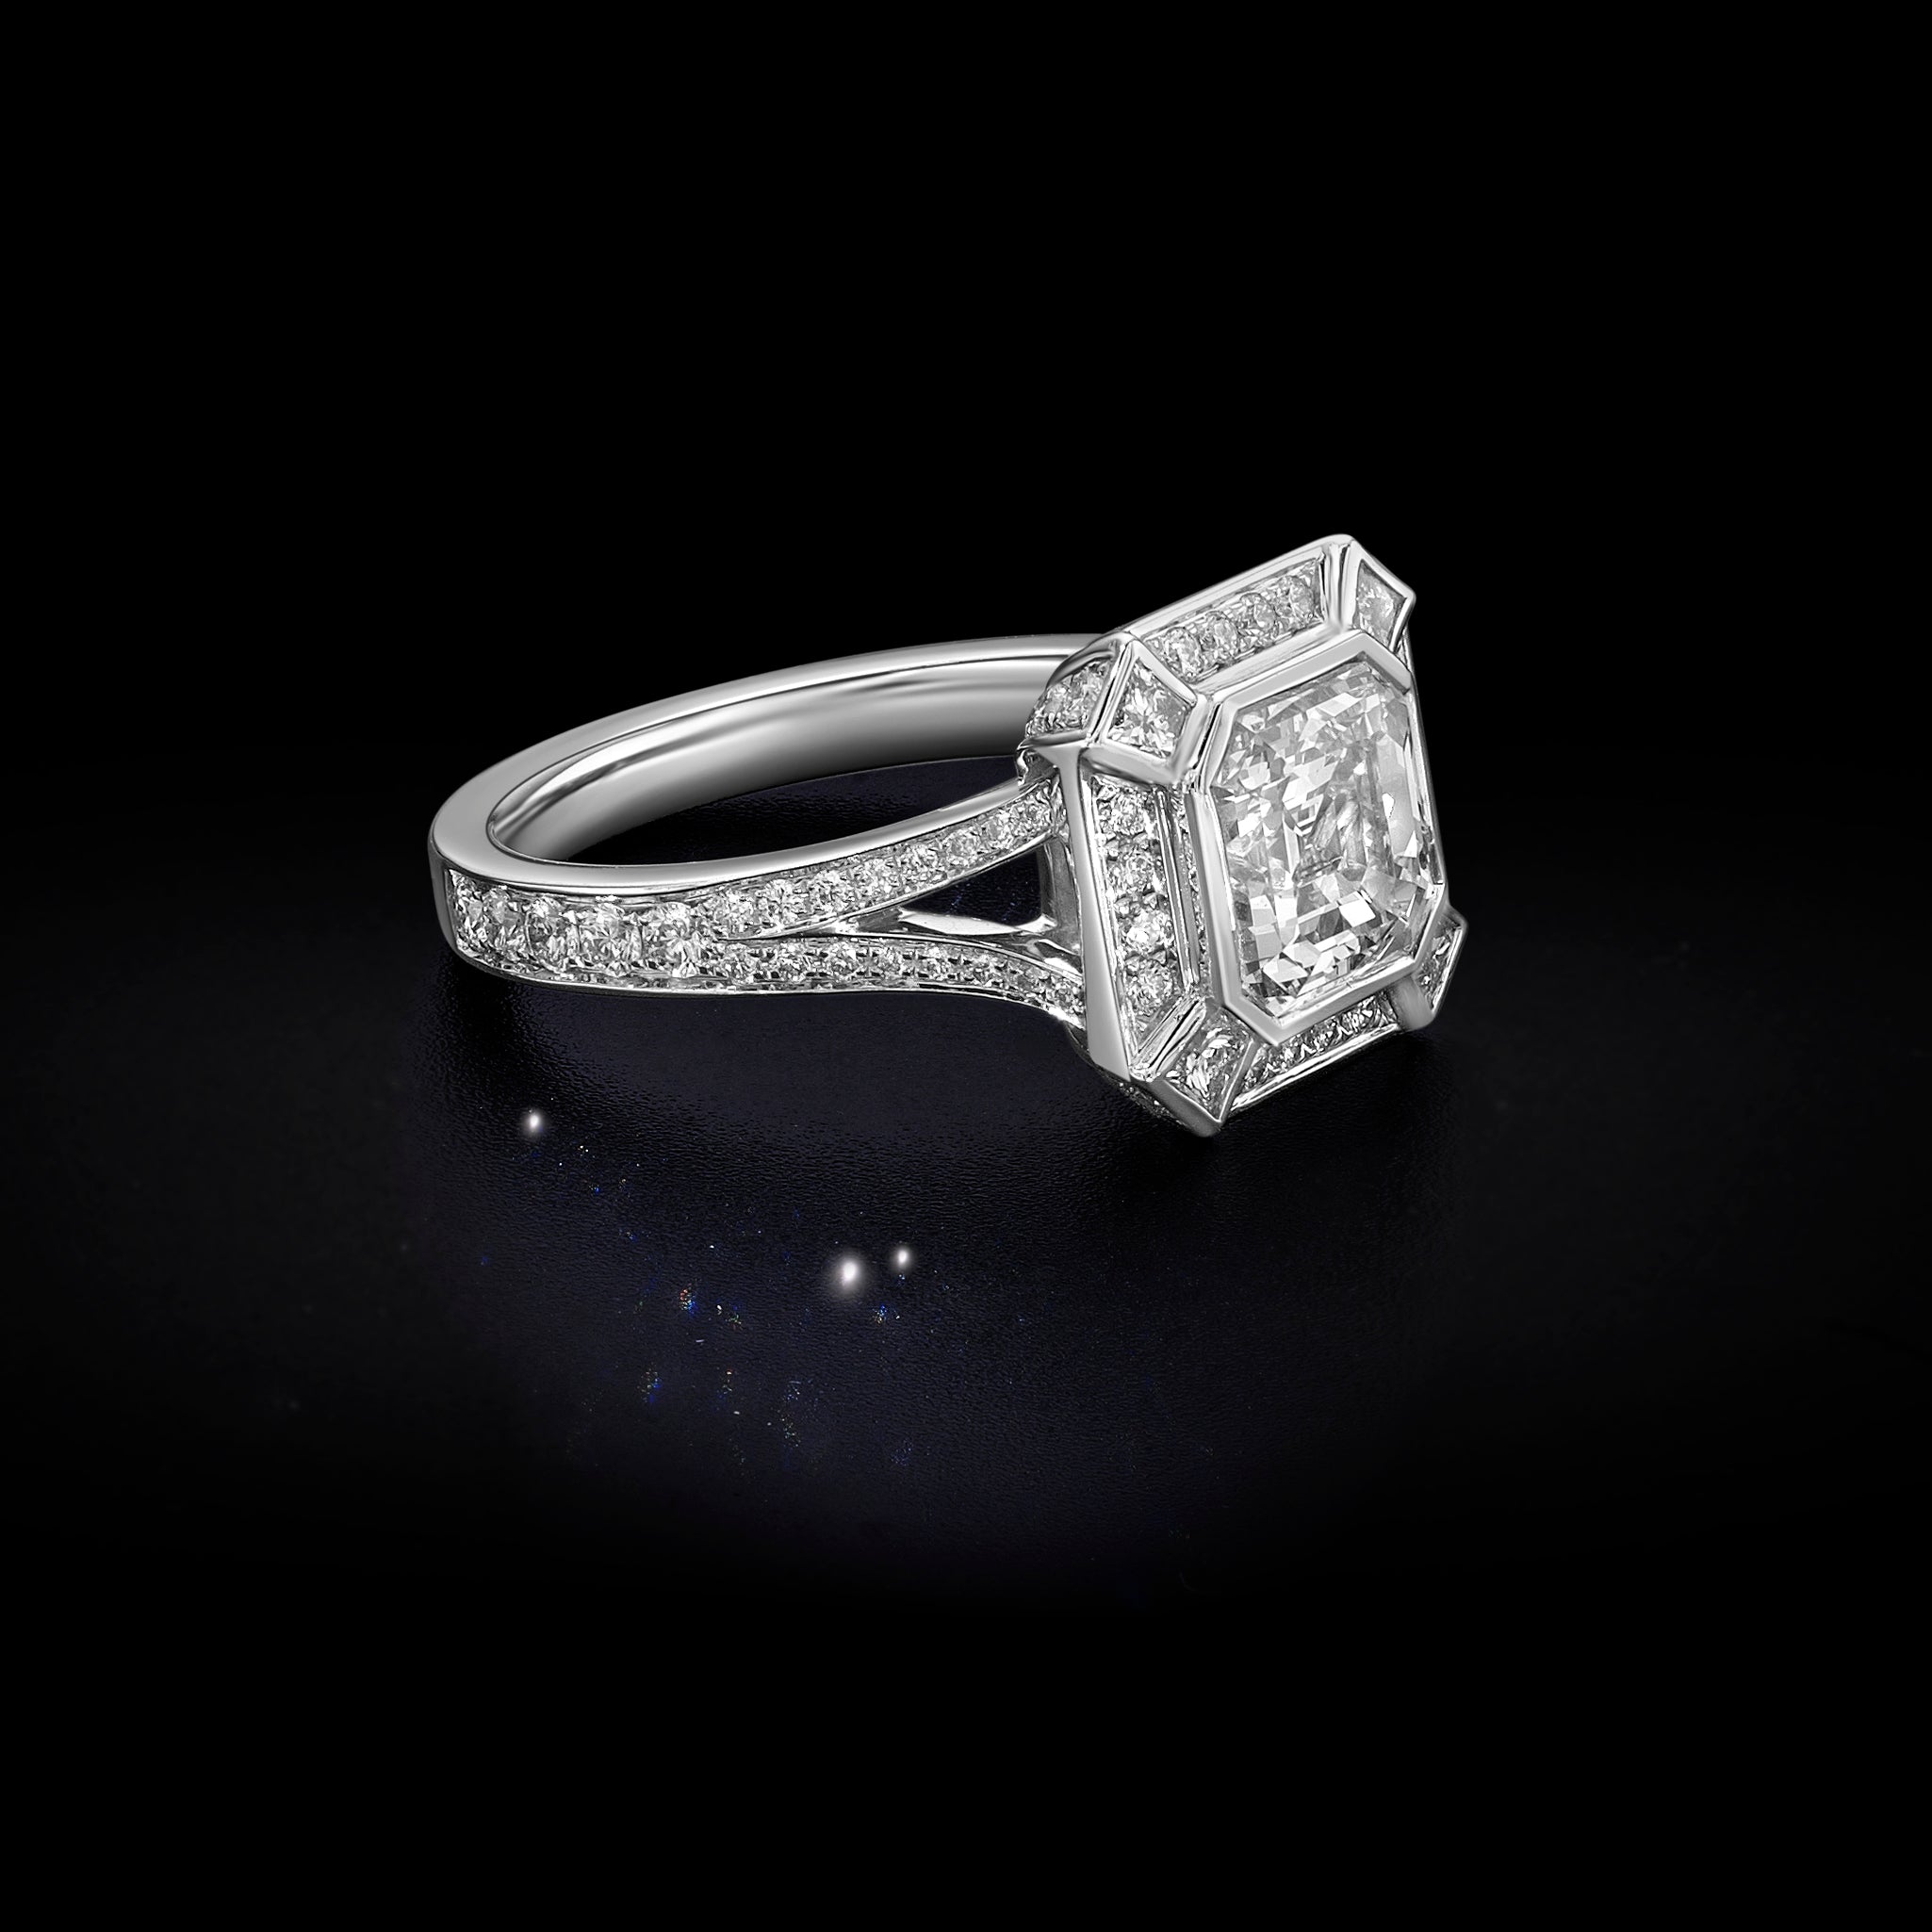 Asher Cut Art Deco Style Ring - 2.79ct TW